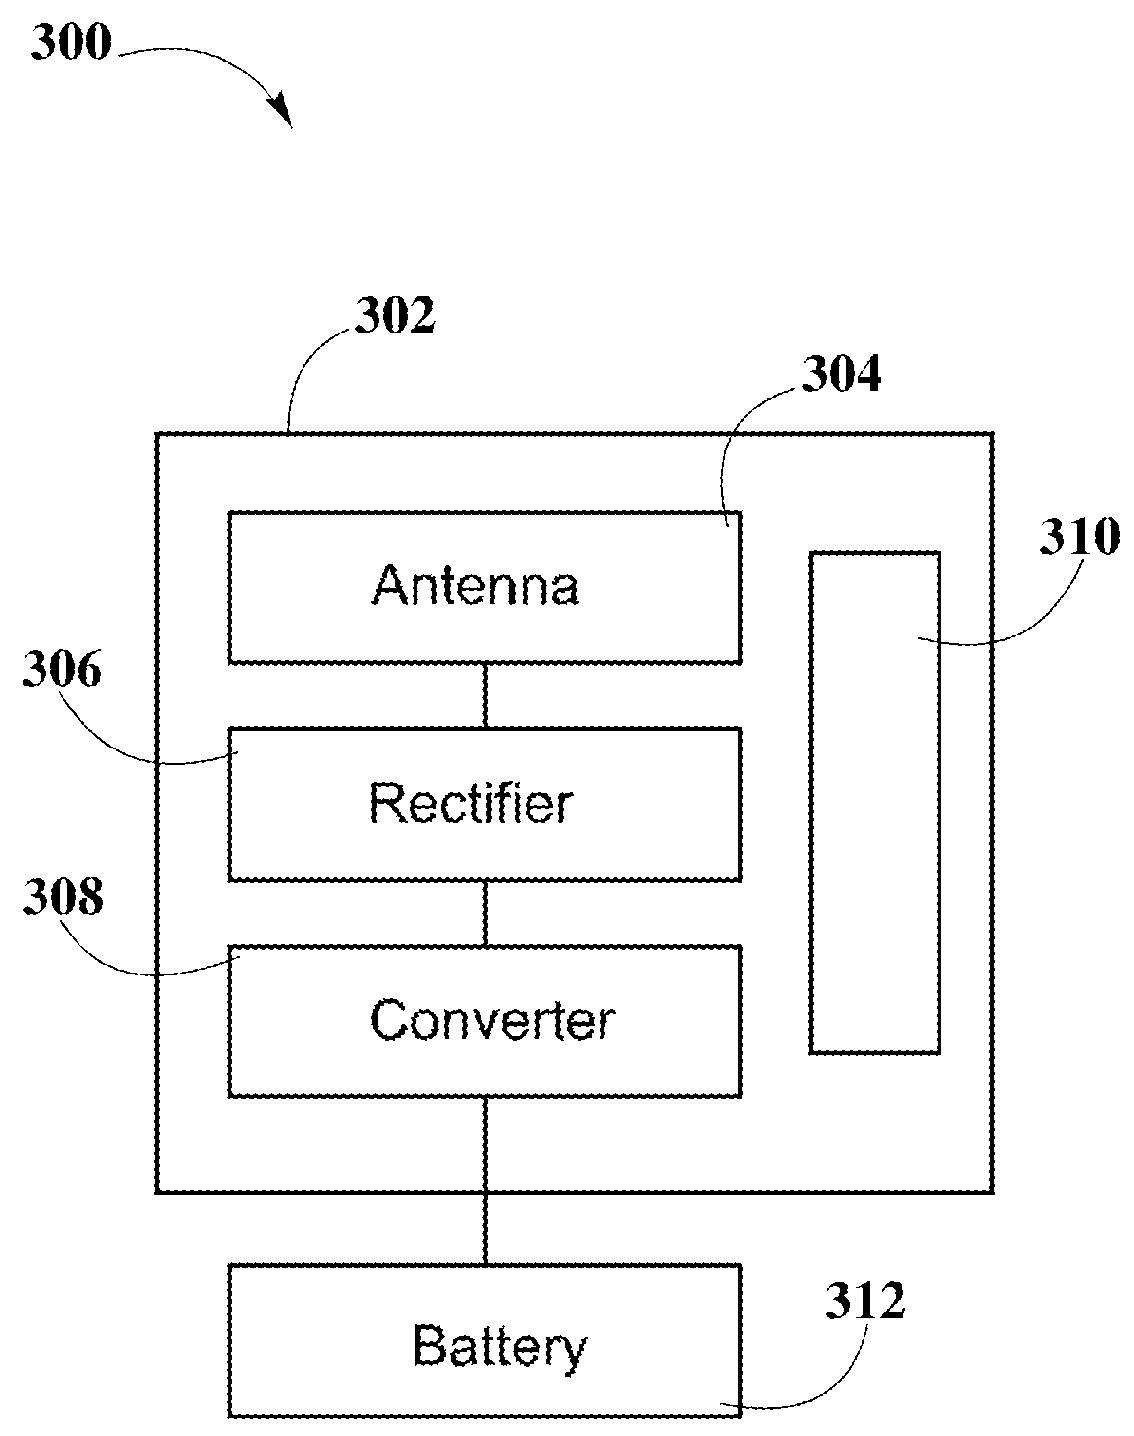 Systems and Methods for Automatically Testing the Communication Between Wireless Power Transmitter and Wireless Power Receiver